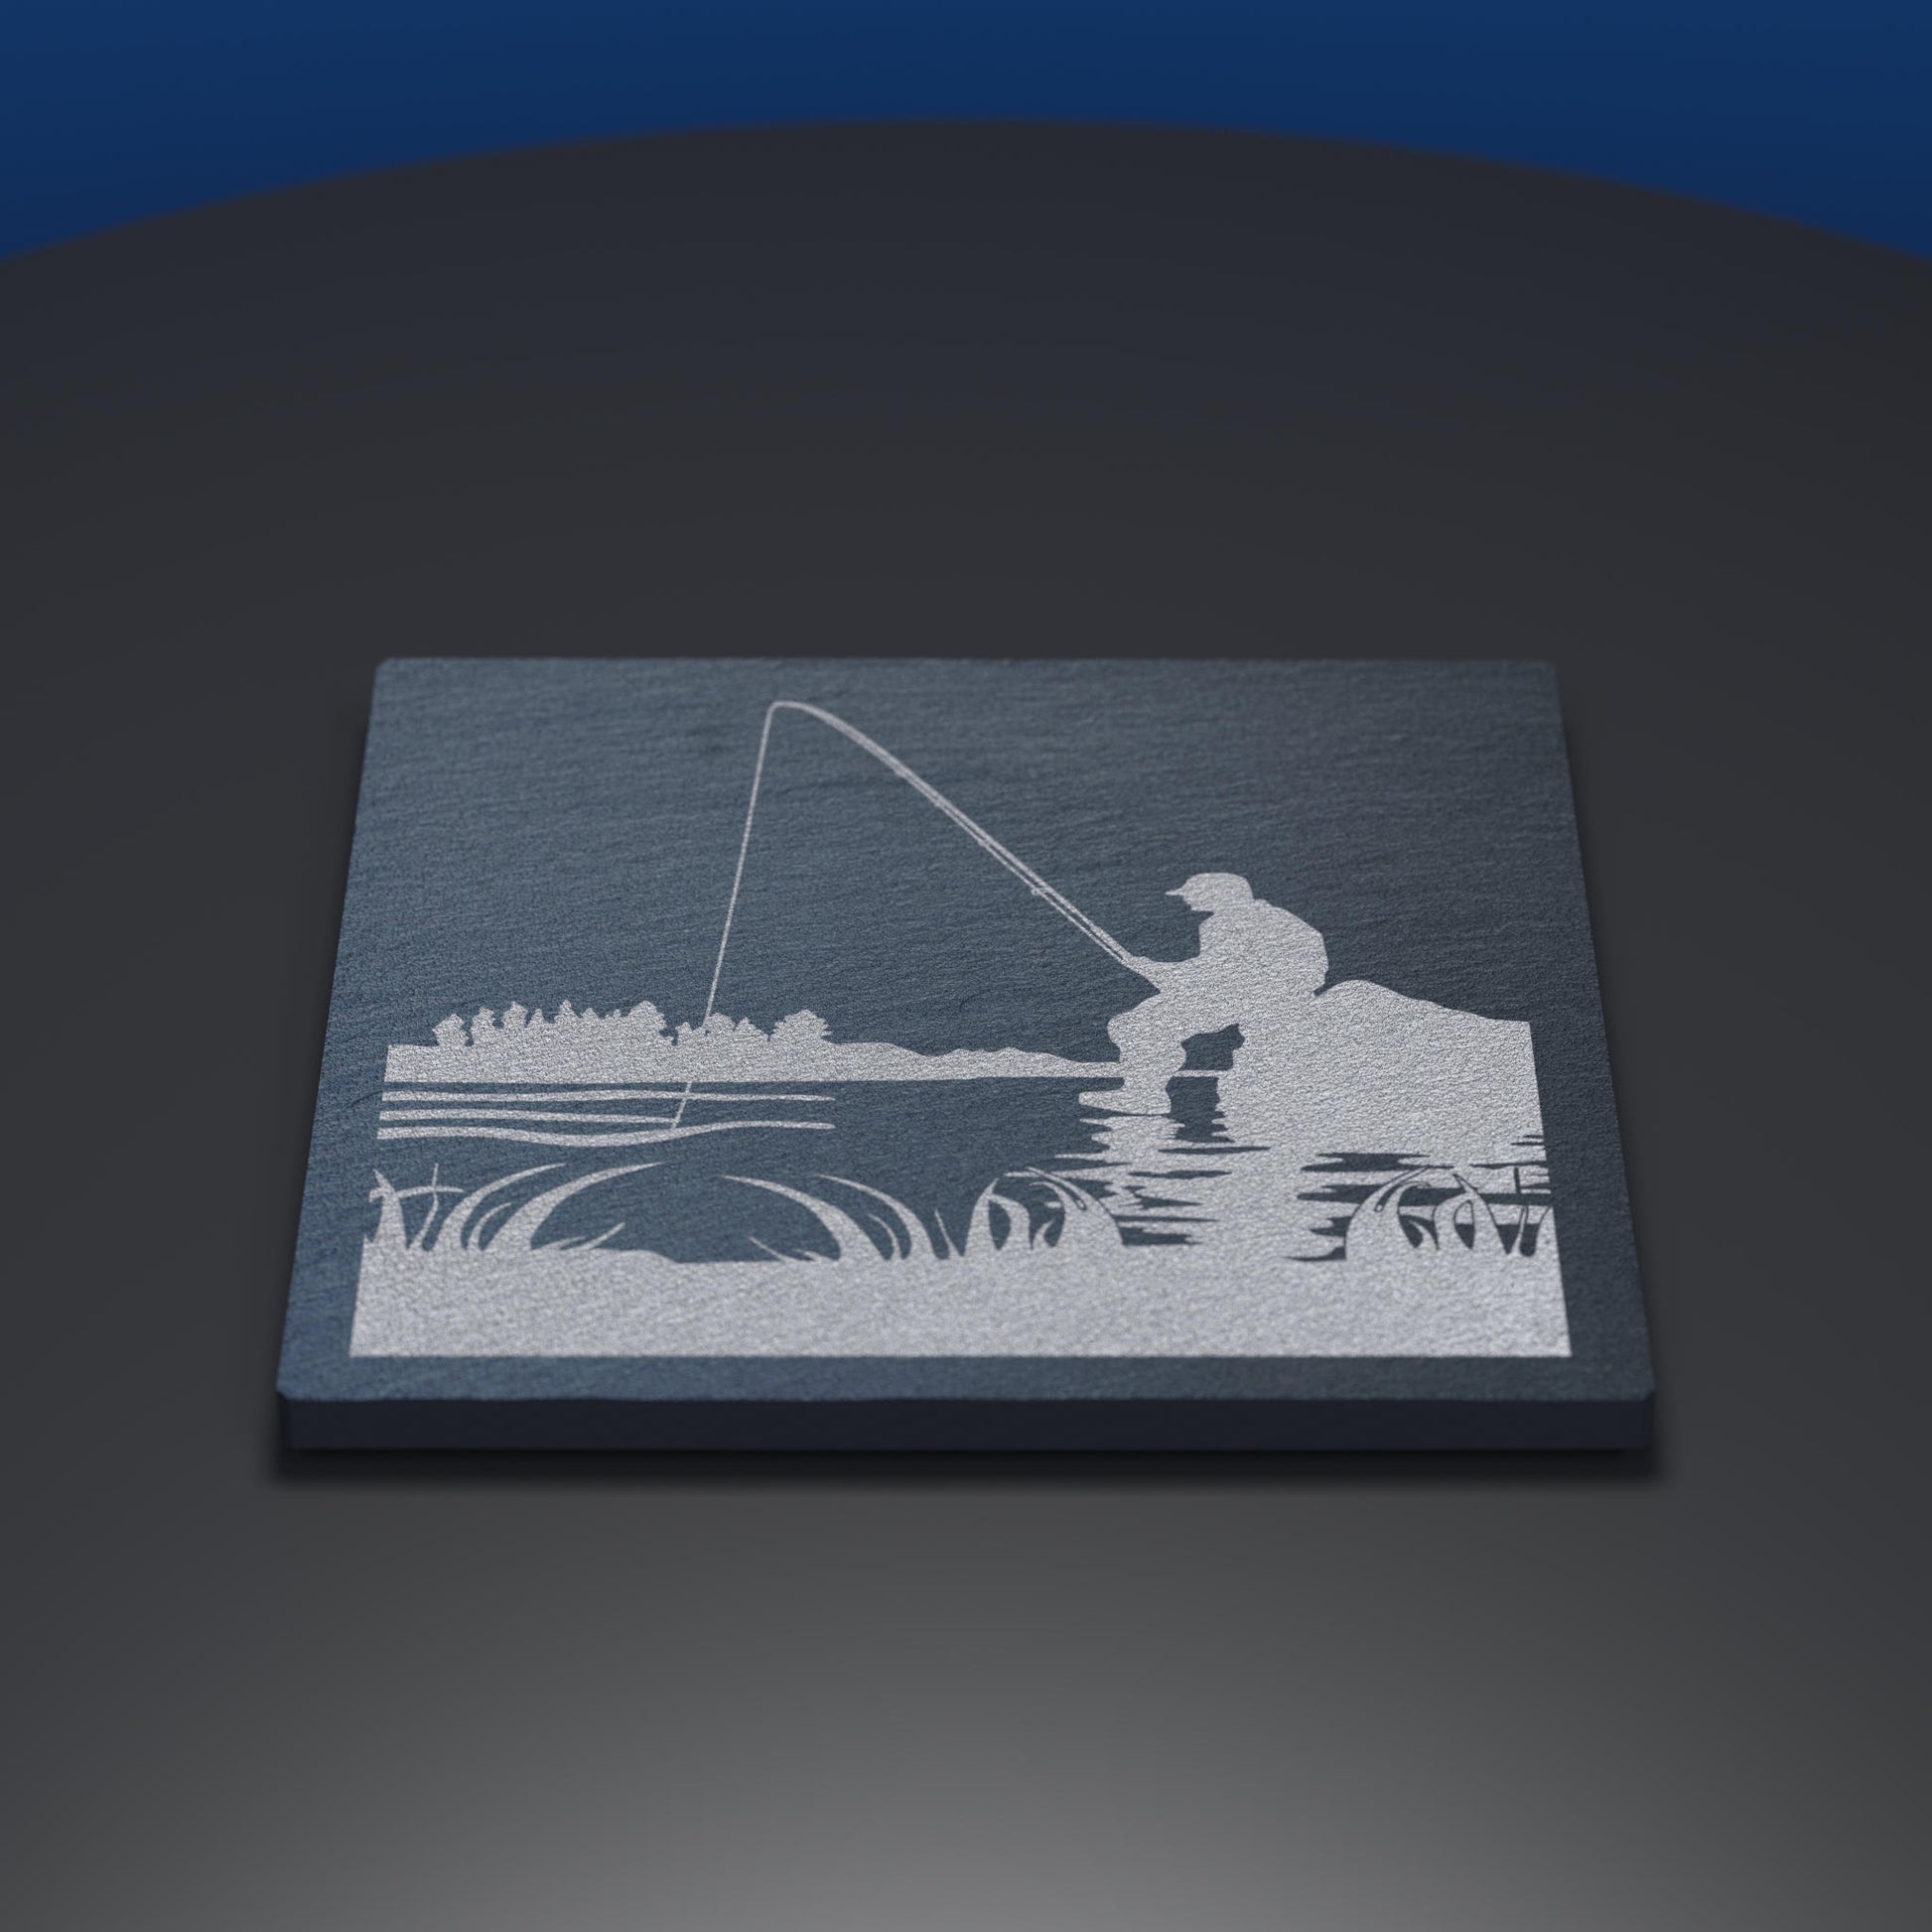 Slate coaster engraved with fishing theme and Eat, Sleep, Fish, Repeat text